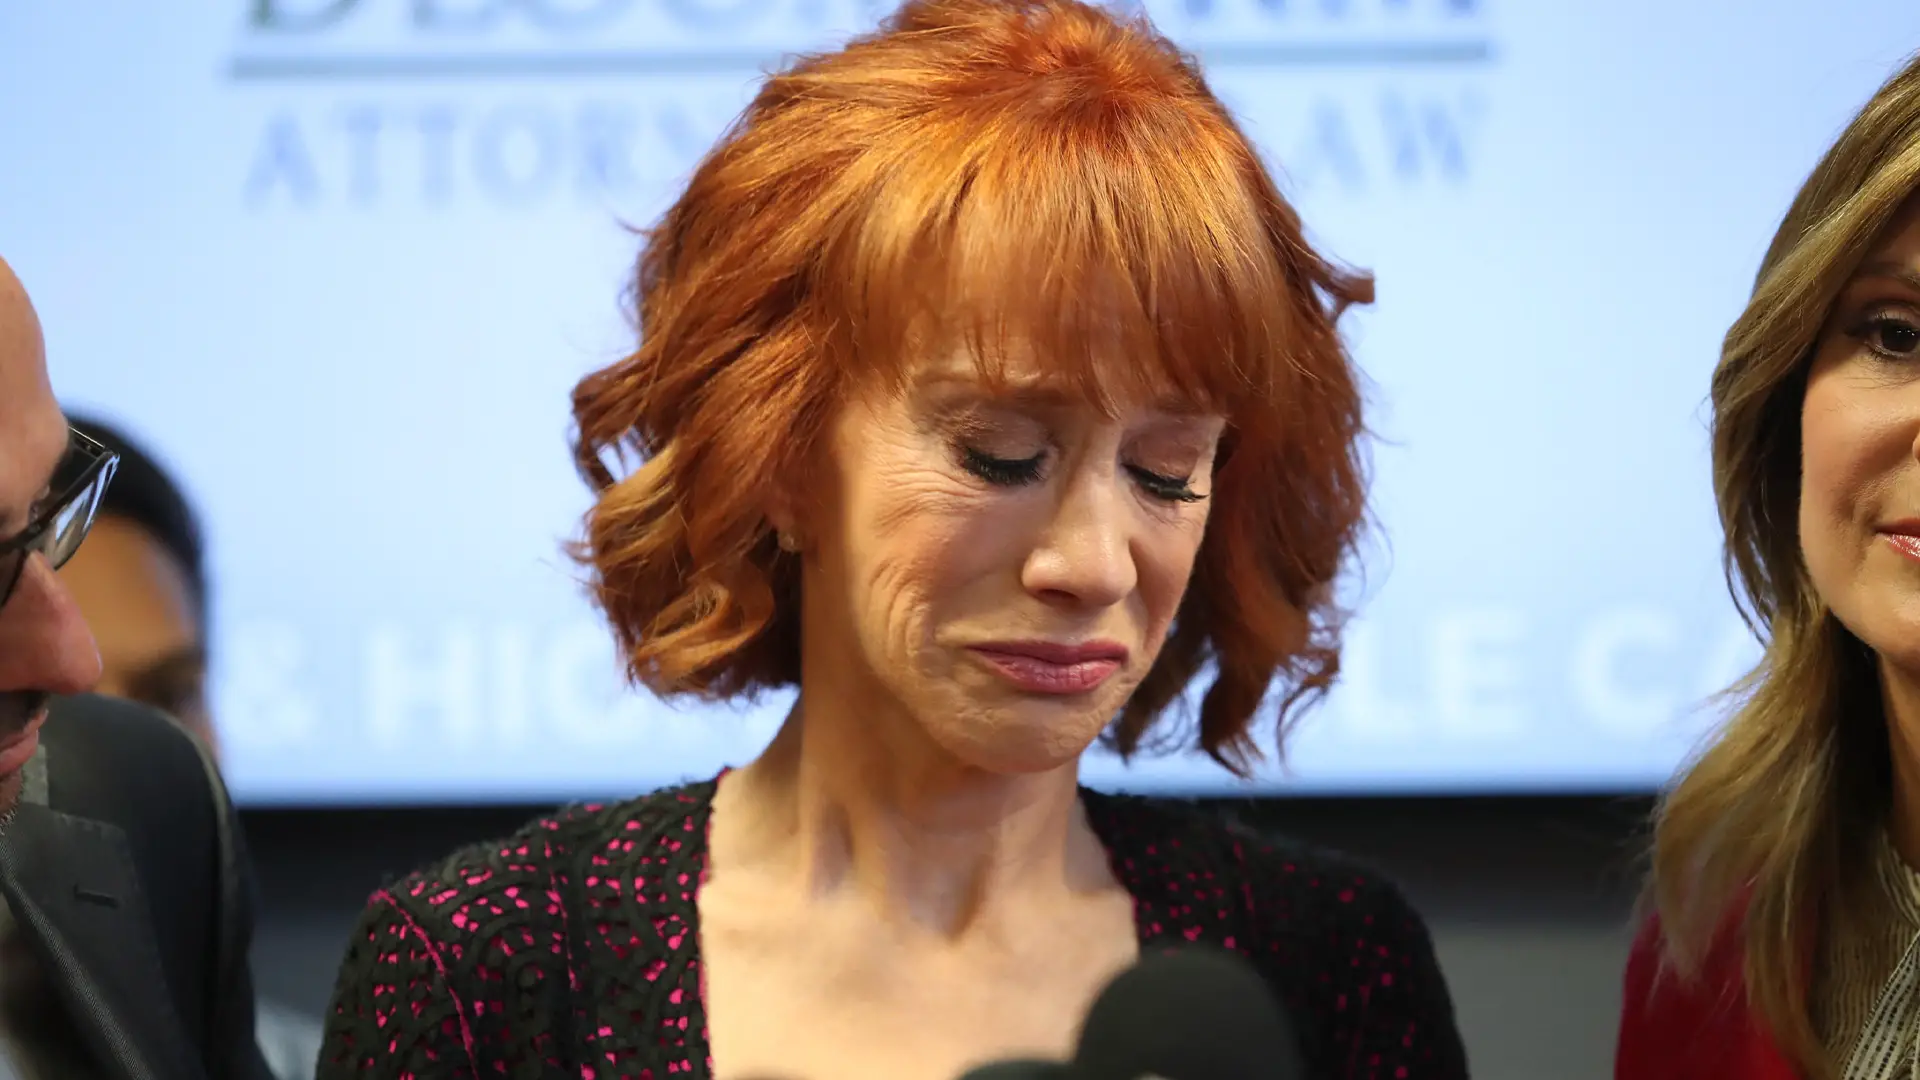 Kathy griffin arrested